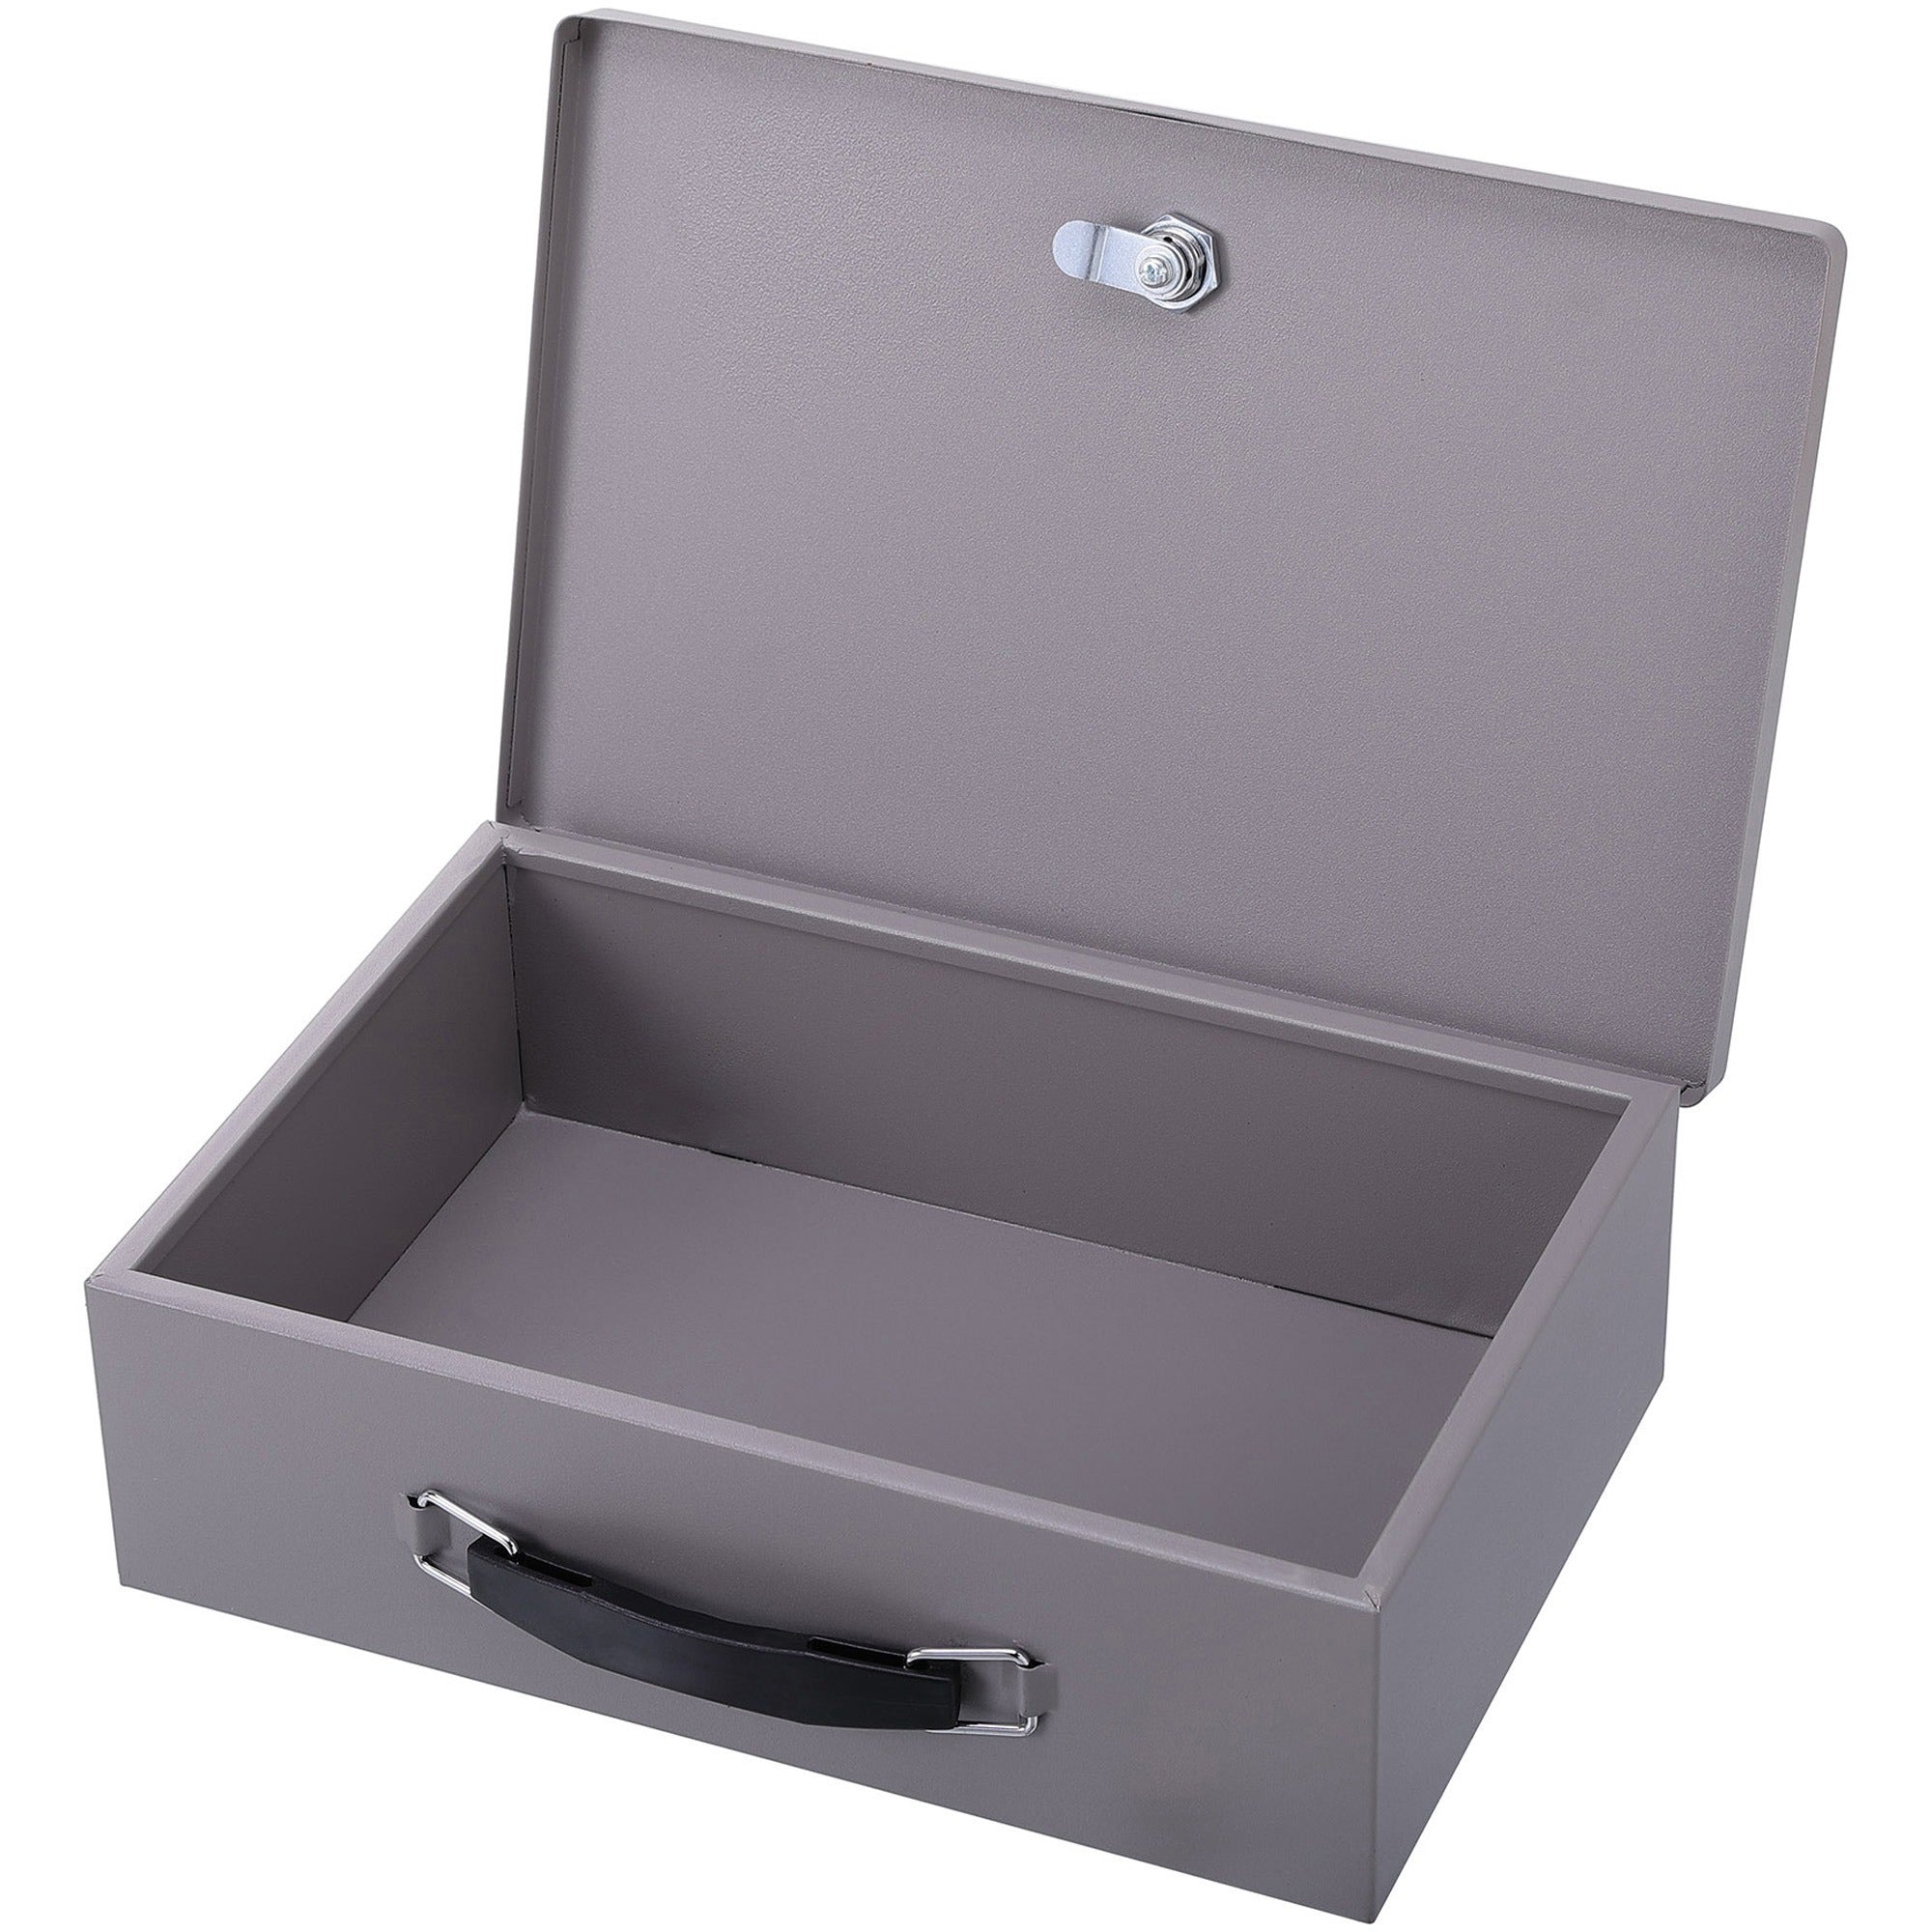 Sparco All-Steel Insulated Cash Box - Steel - Gray - 3.8" Height x 12.8" Width x 8.3" Depth - 